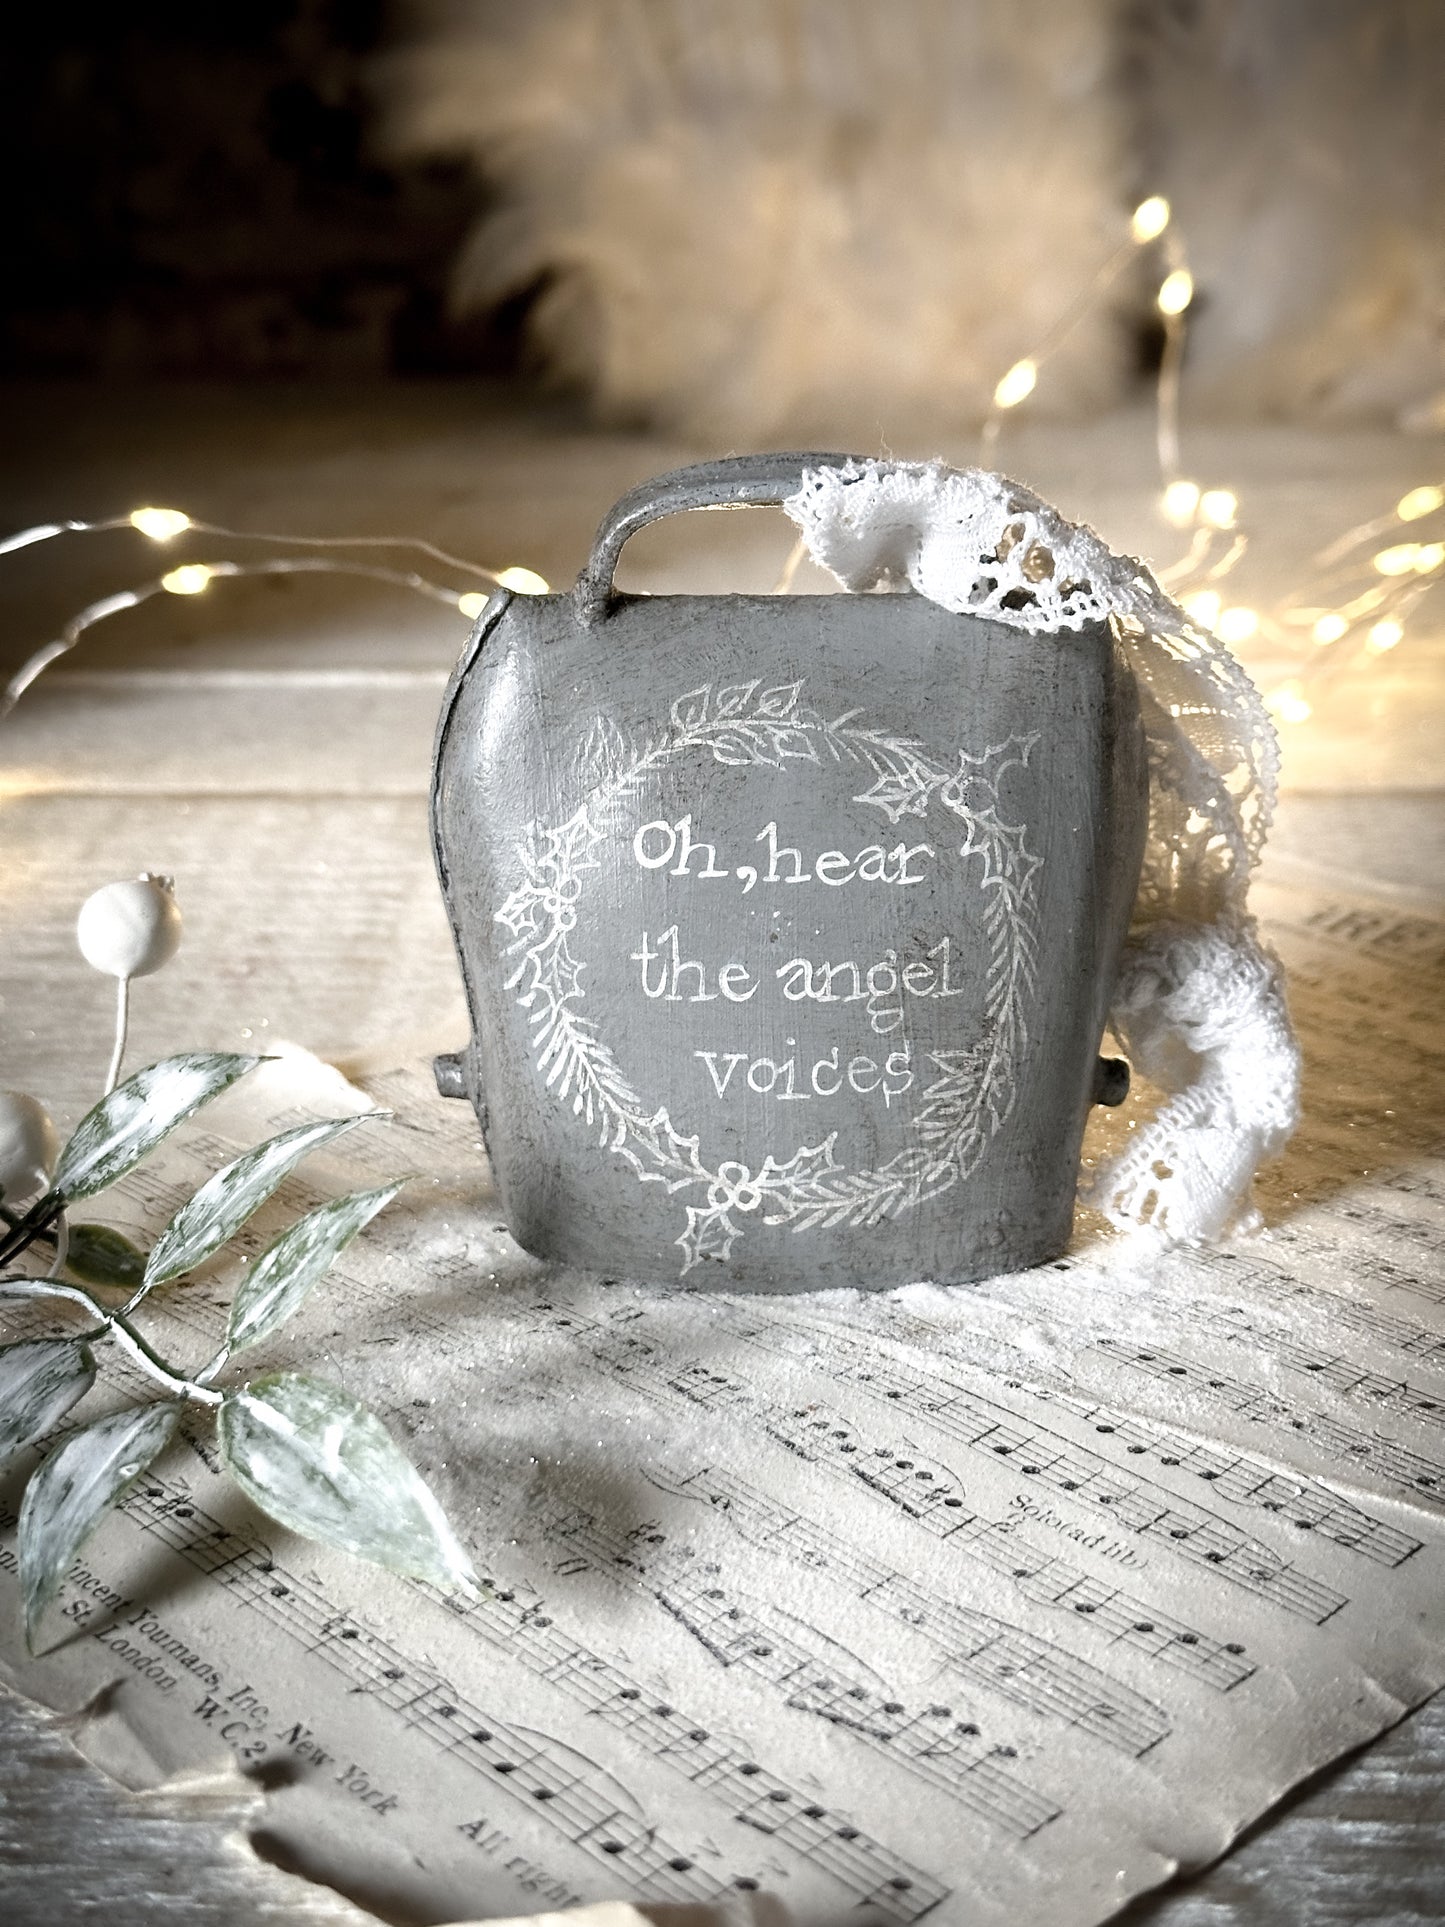 A vintage bell with a hand painted quote